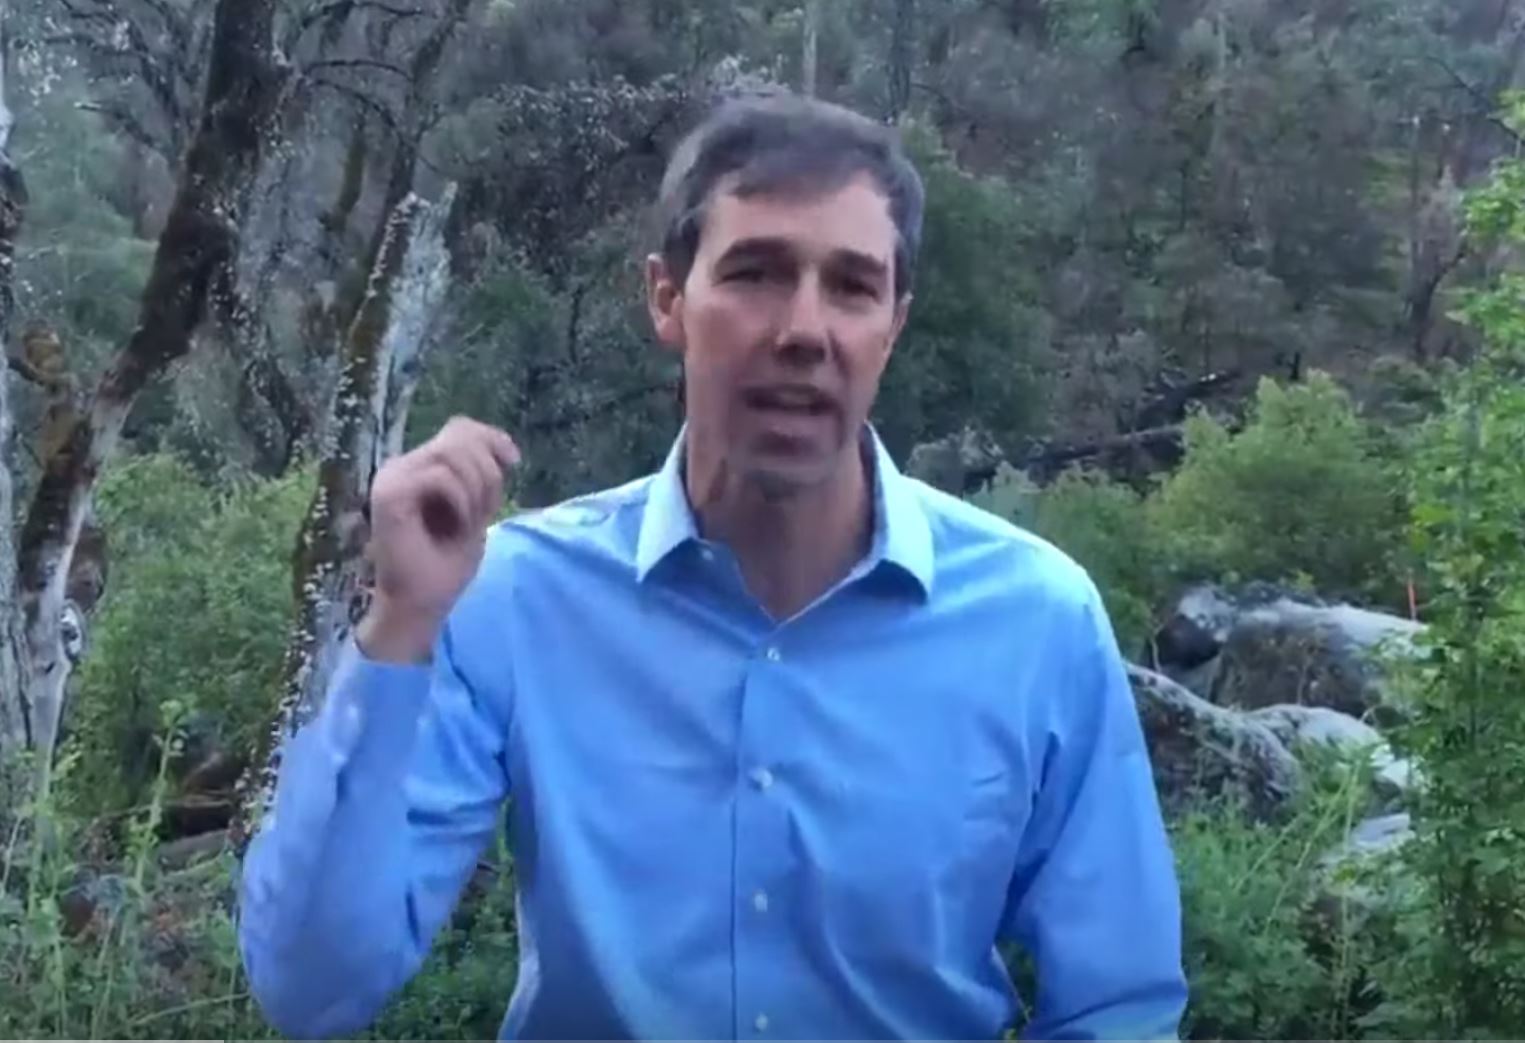 Beto O’Rourke would bill $42,000 per household to pay for renewable energy